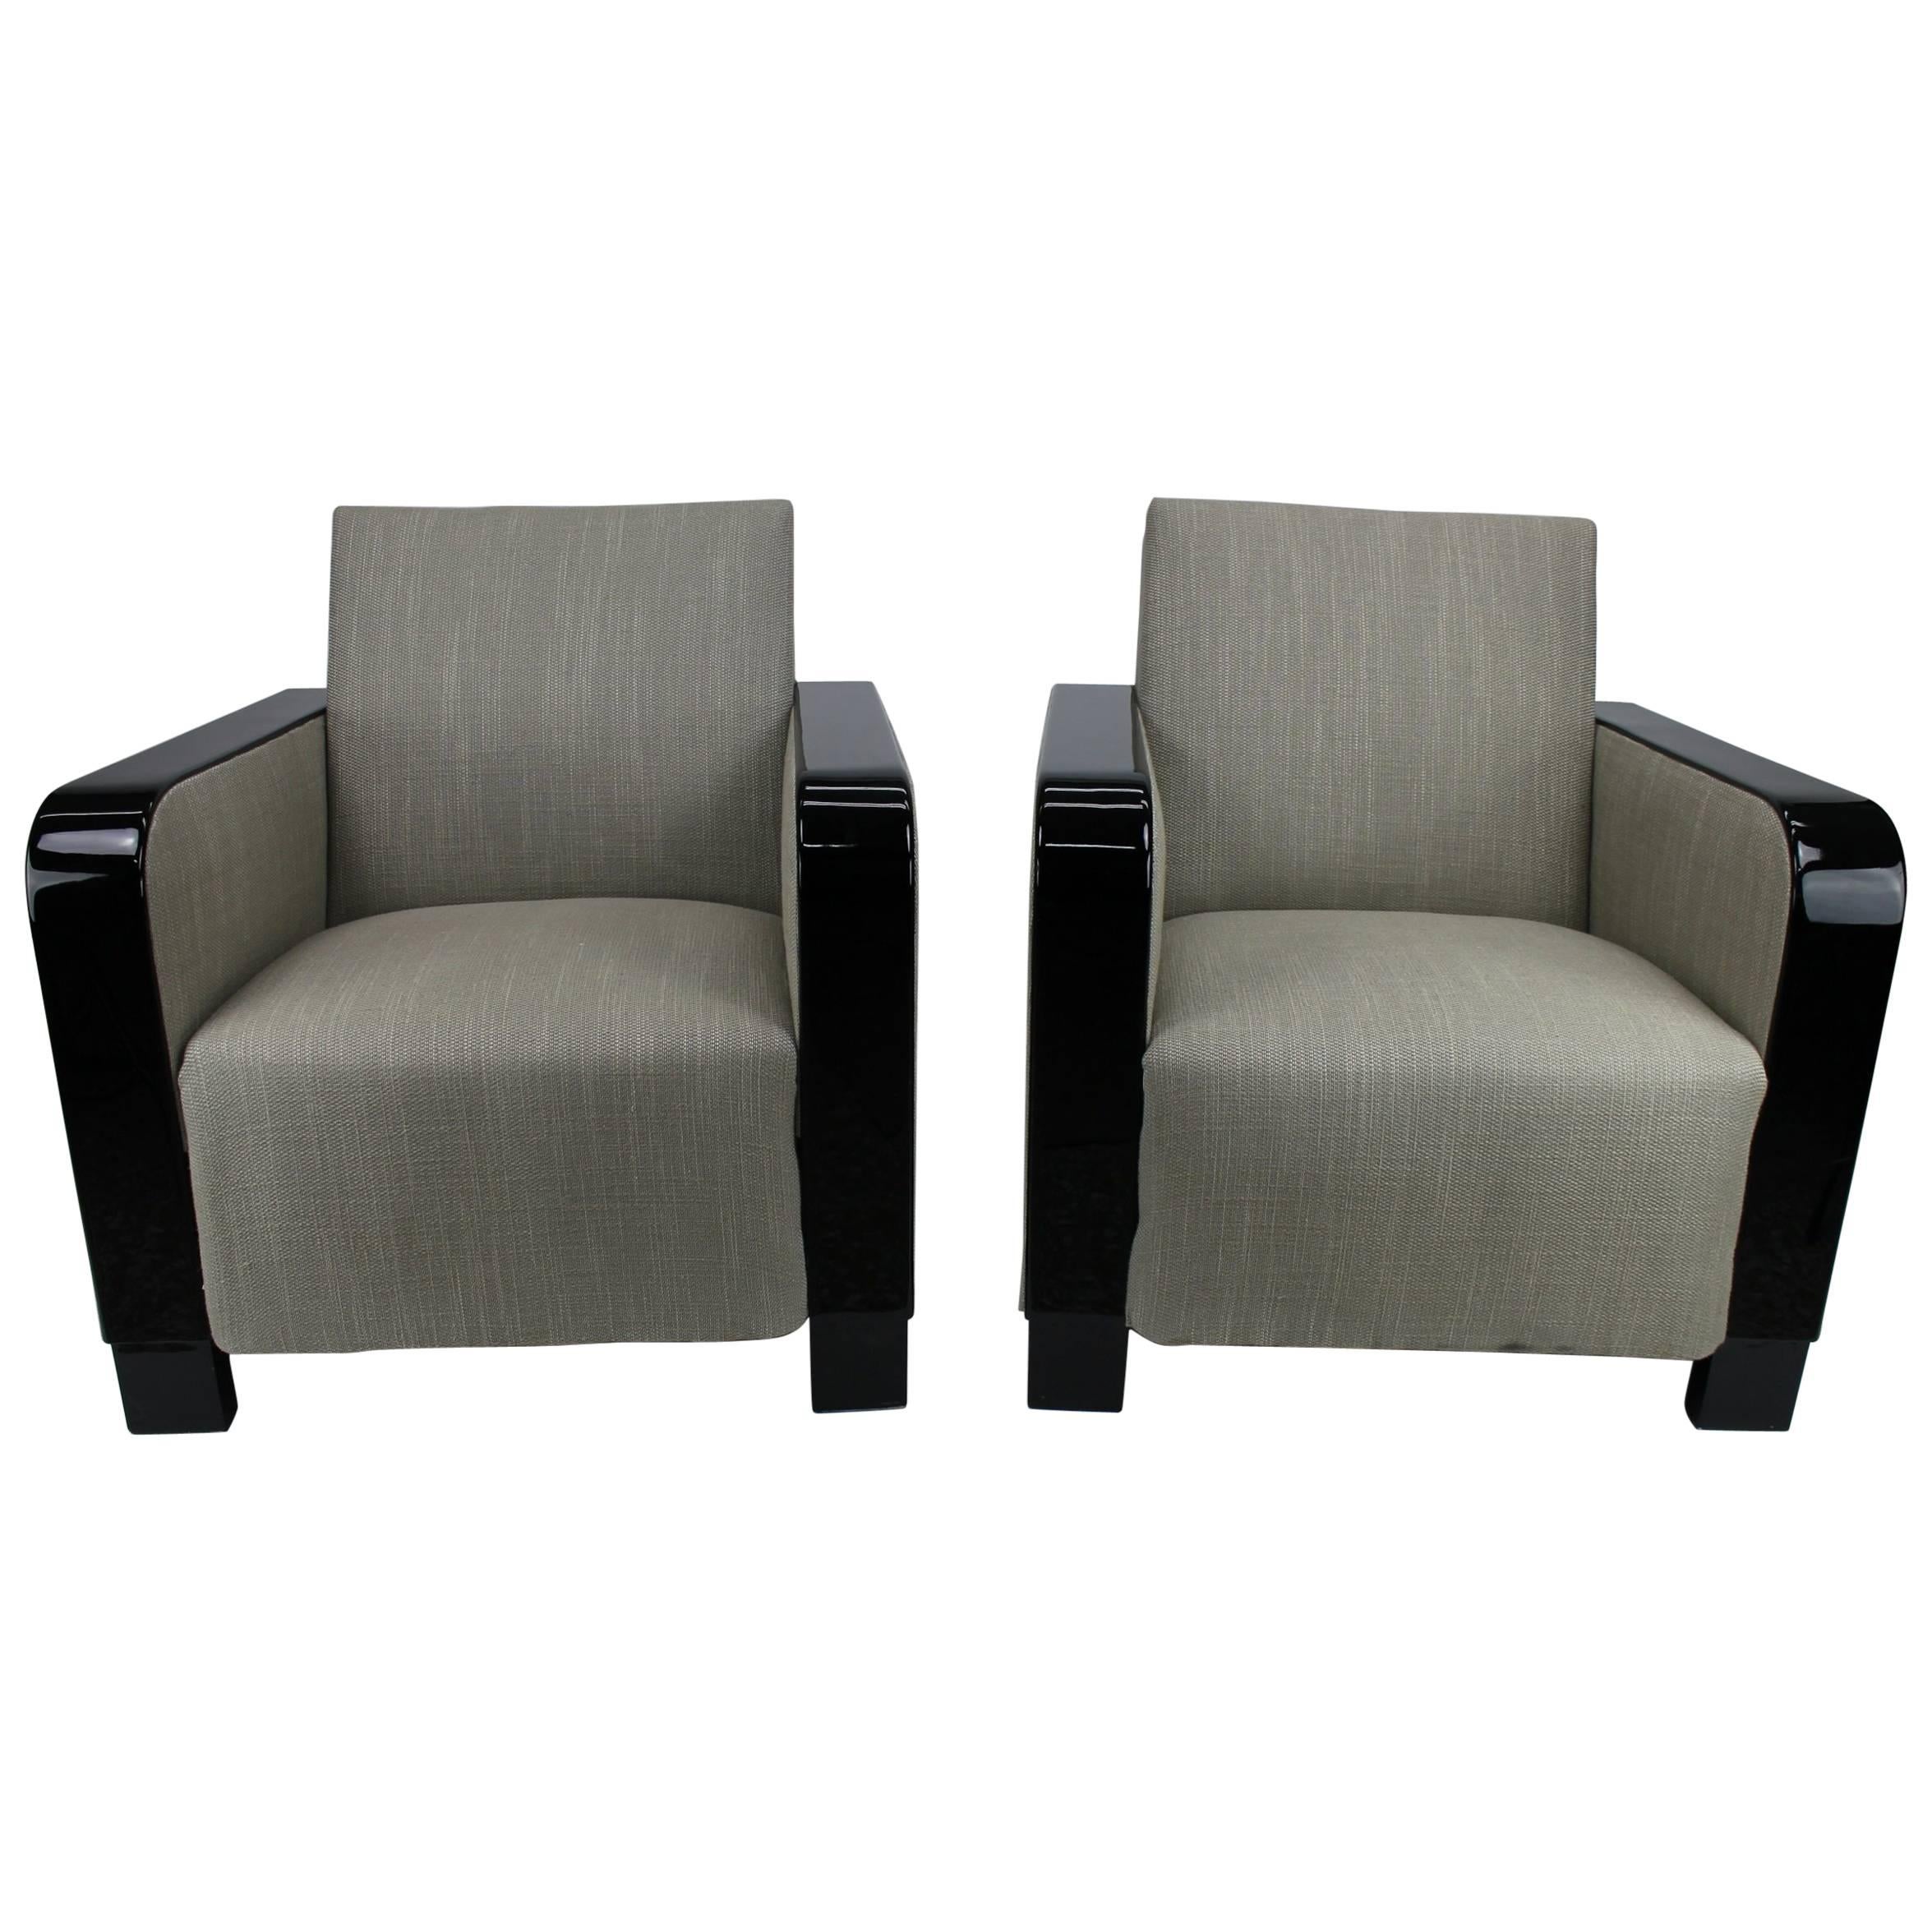 Pair of Swedish Art Deco 1930s Black Lacquered Lounge Chairs